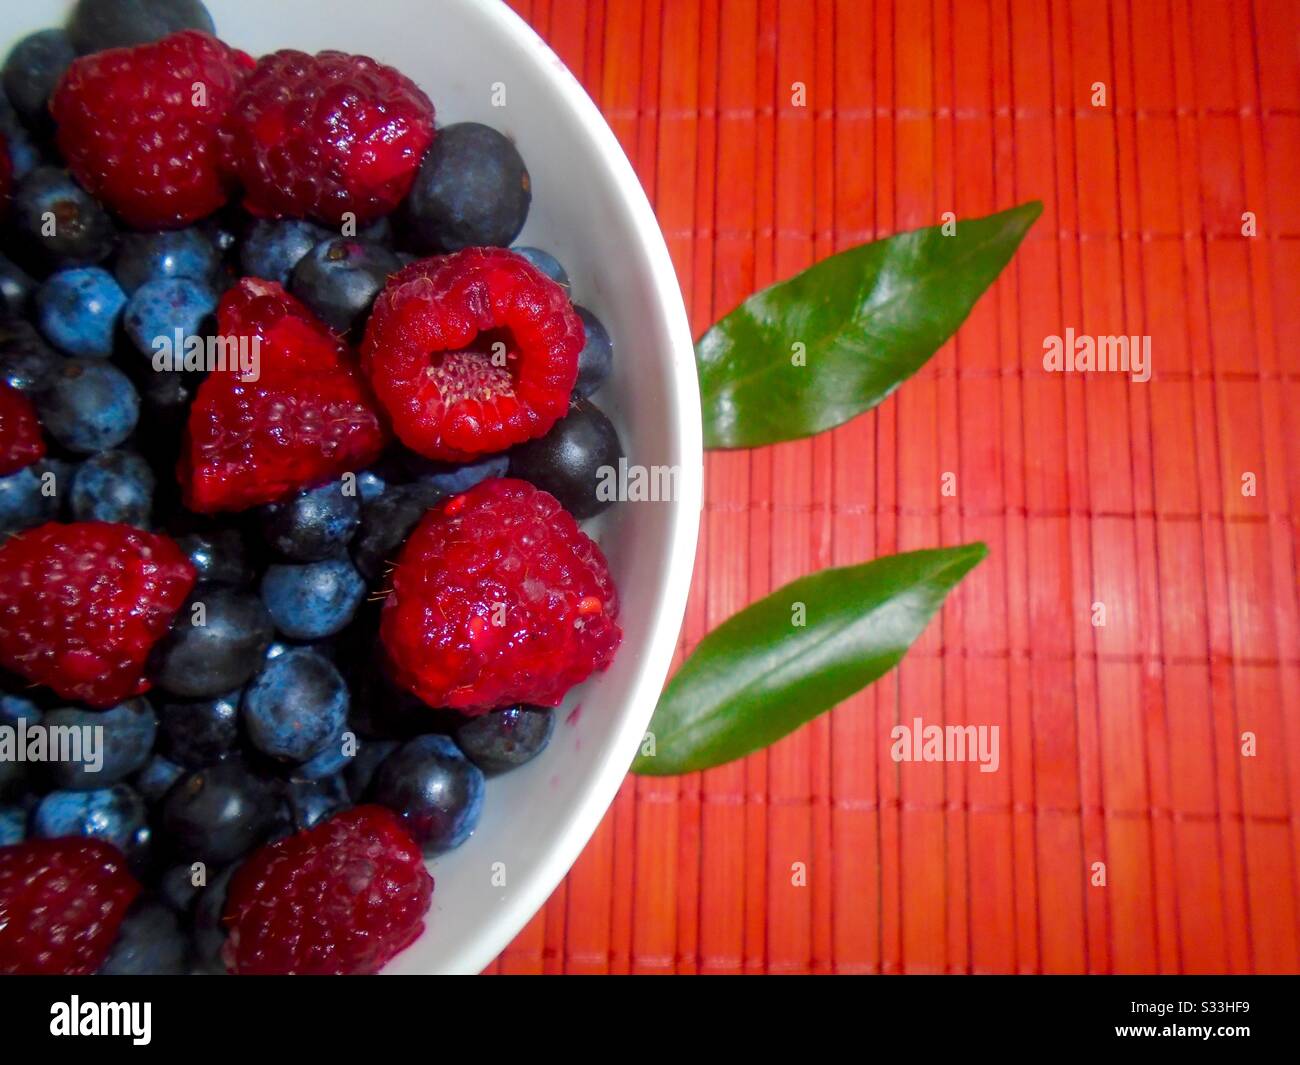 Bowl with blueberries and raspberries Stock Photo